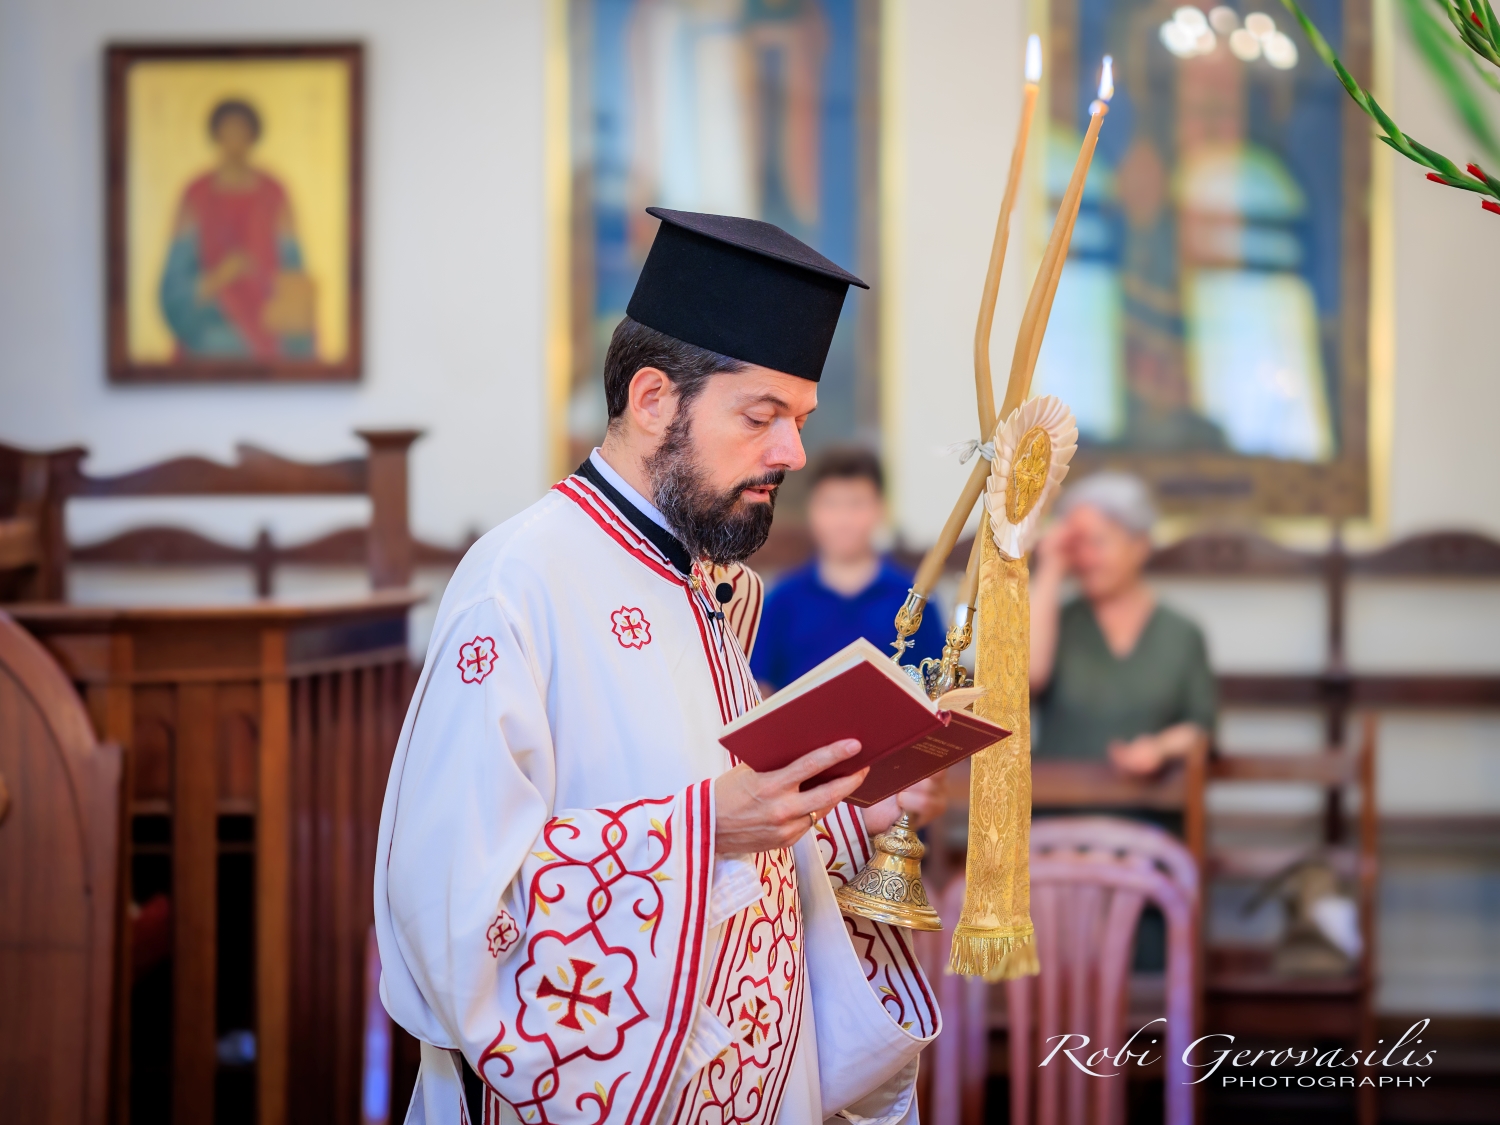 Perth: Feast of the Holy Forefathers celebrated at the Church of Sts Constantine and Helene